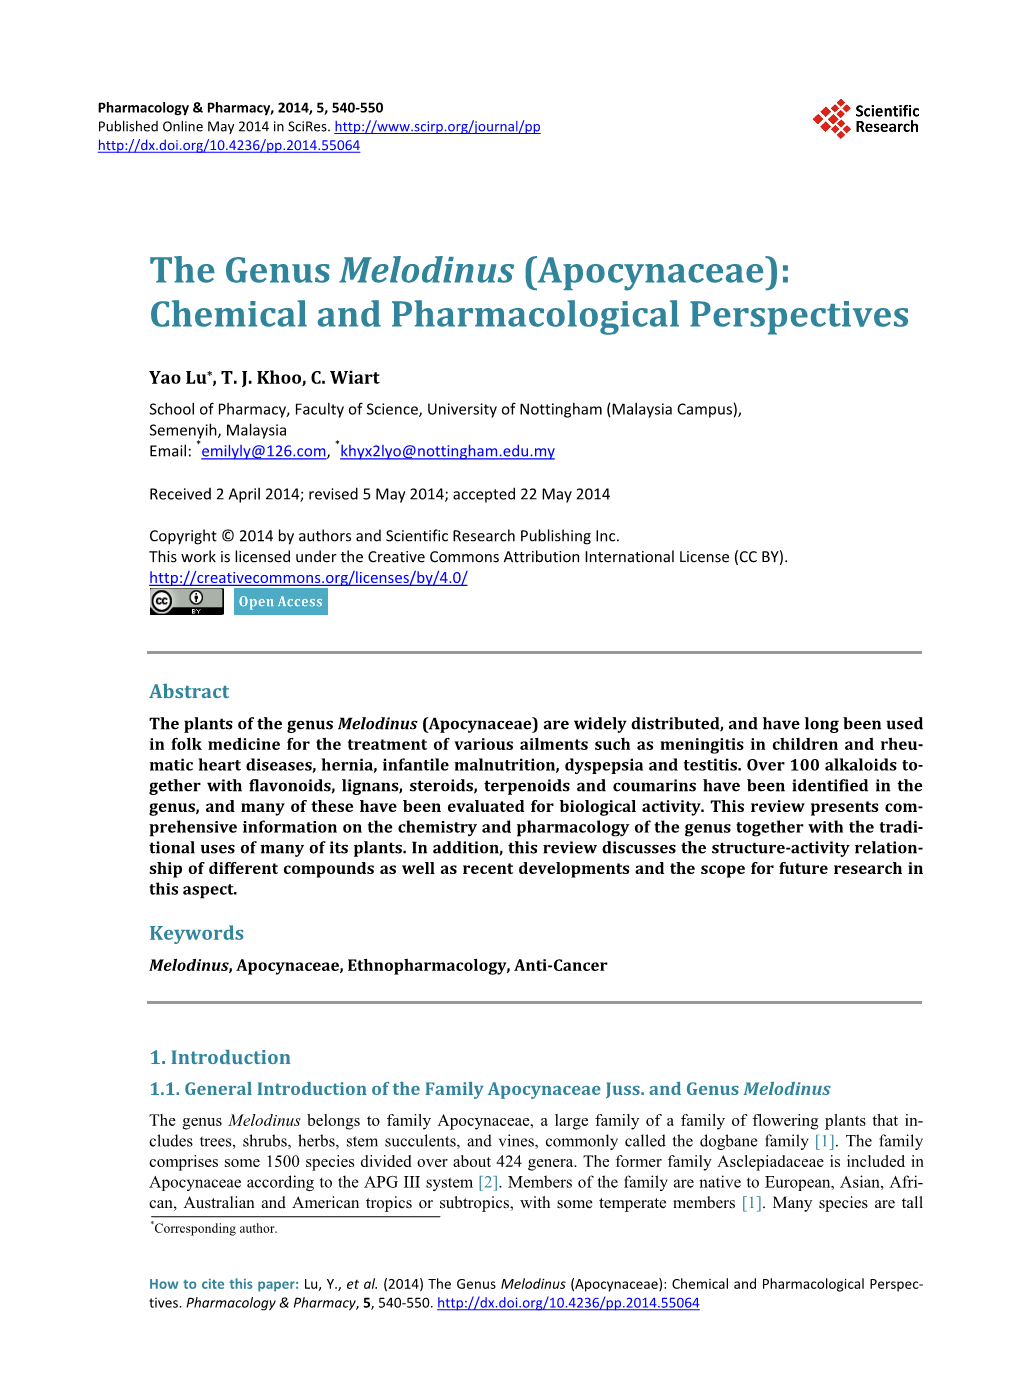 The Genus Melodinus (Apocynaceae): Chemical and Pharmacological Perspectives